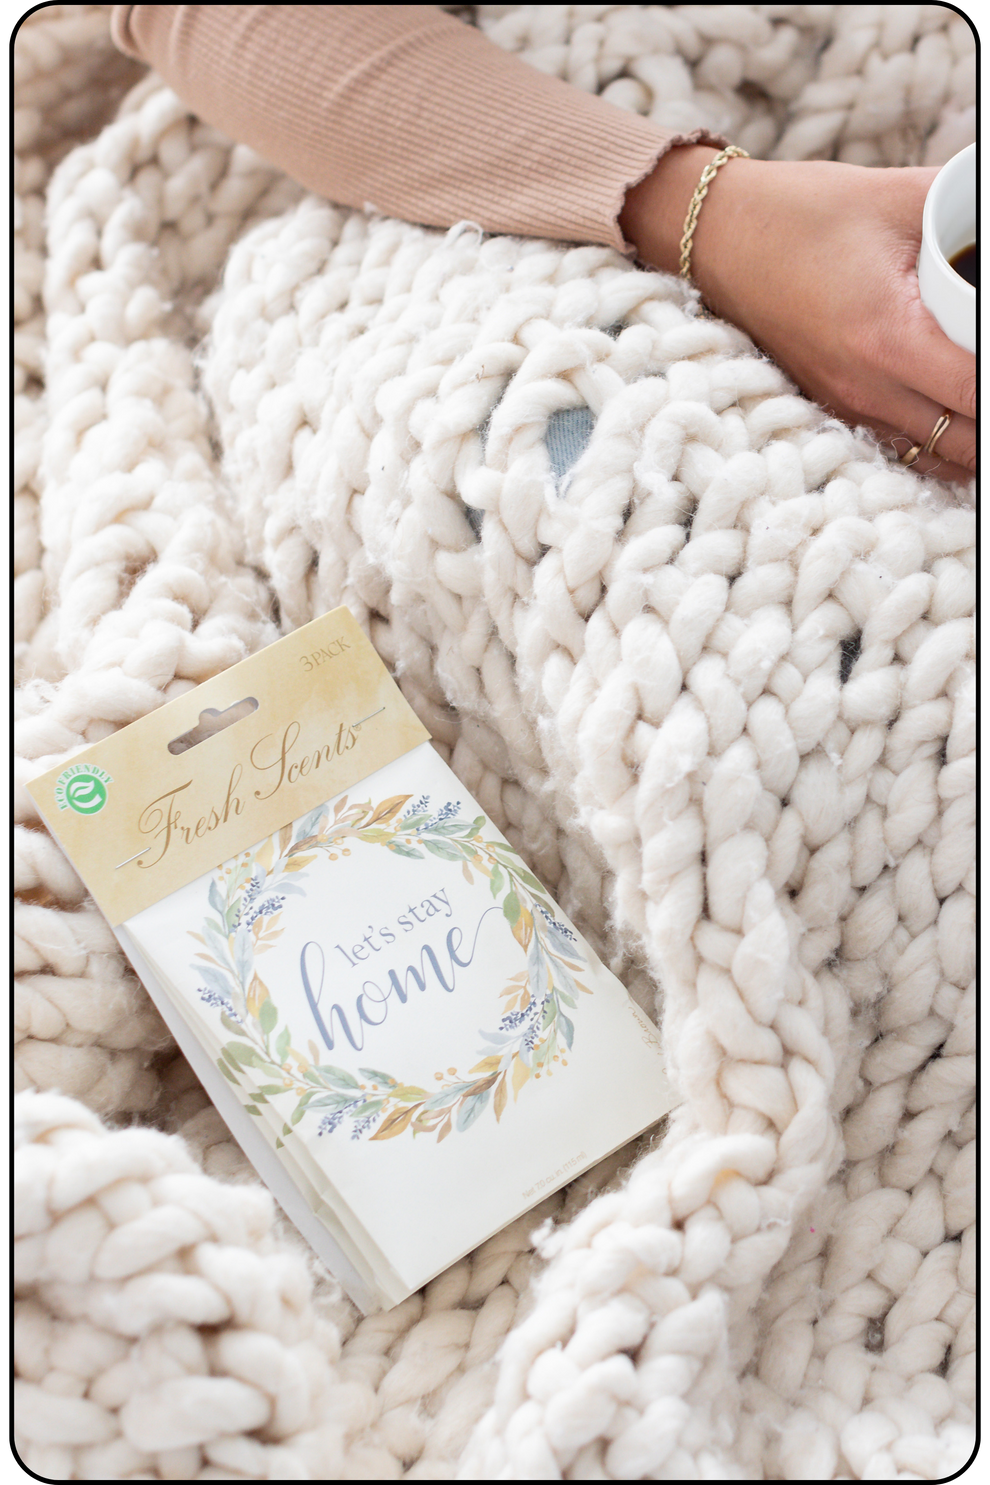 Let's Stay Home scented sachet with throw blankets